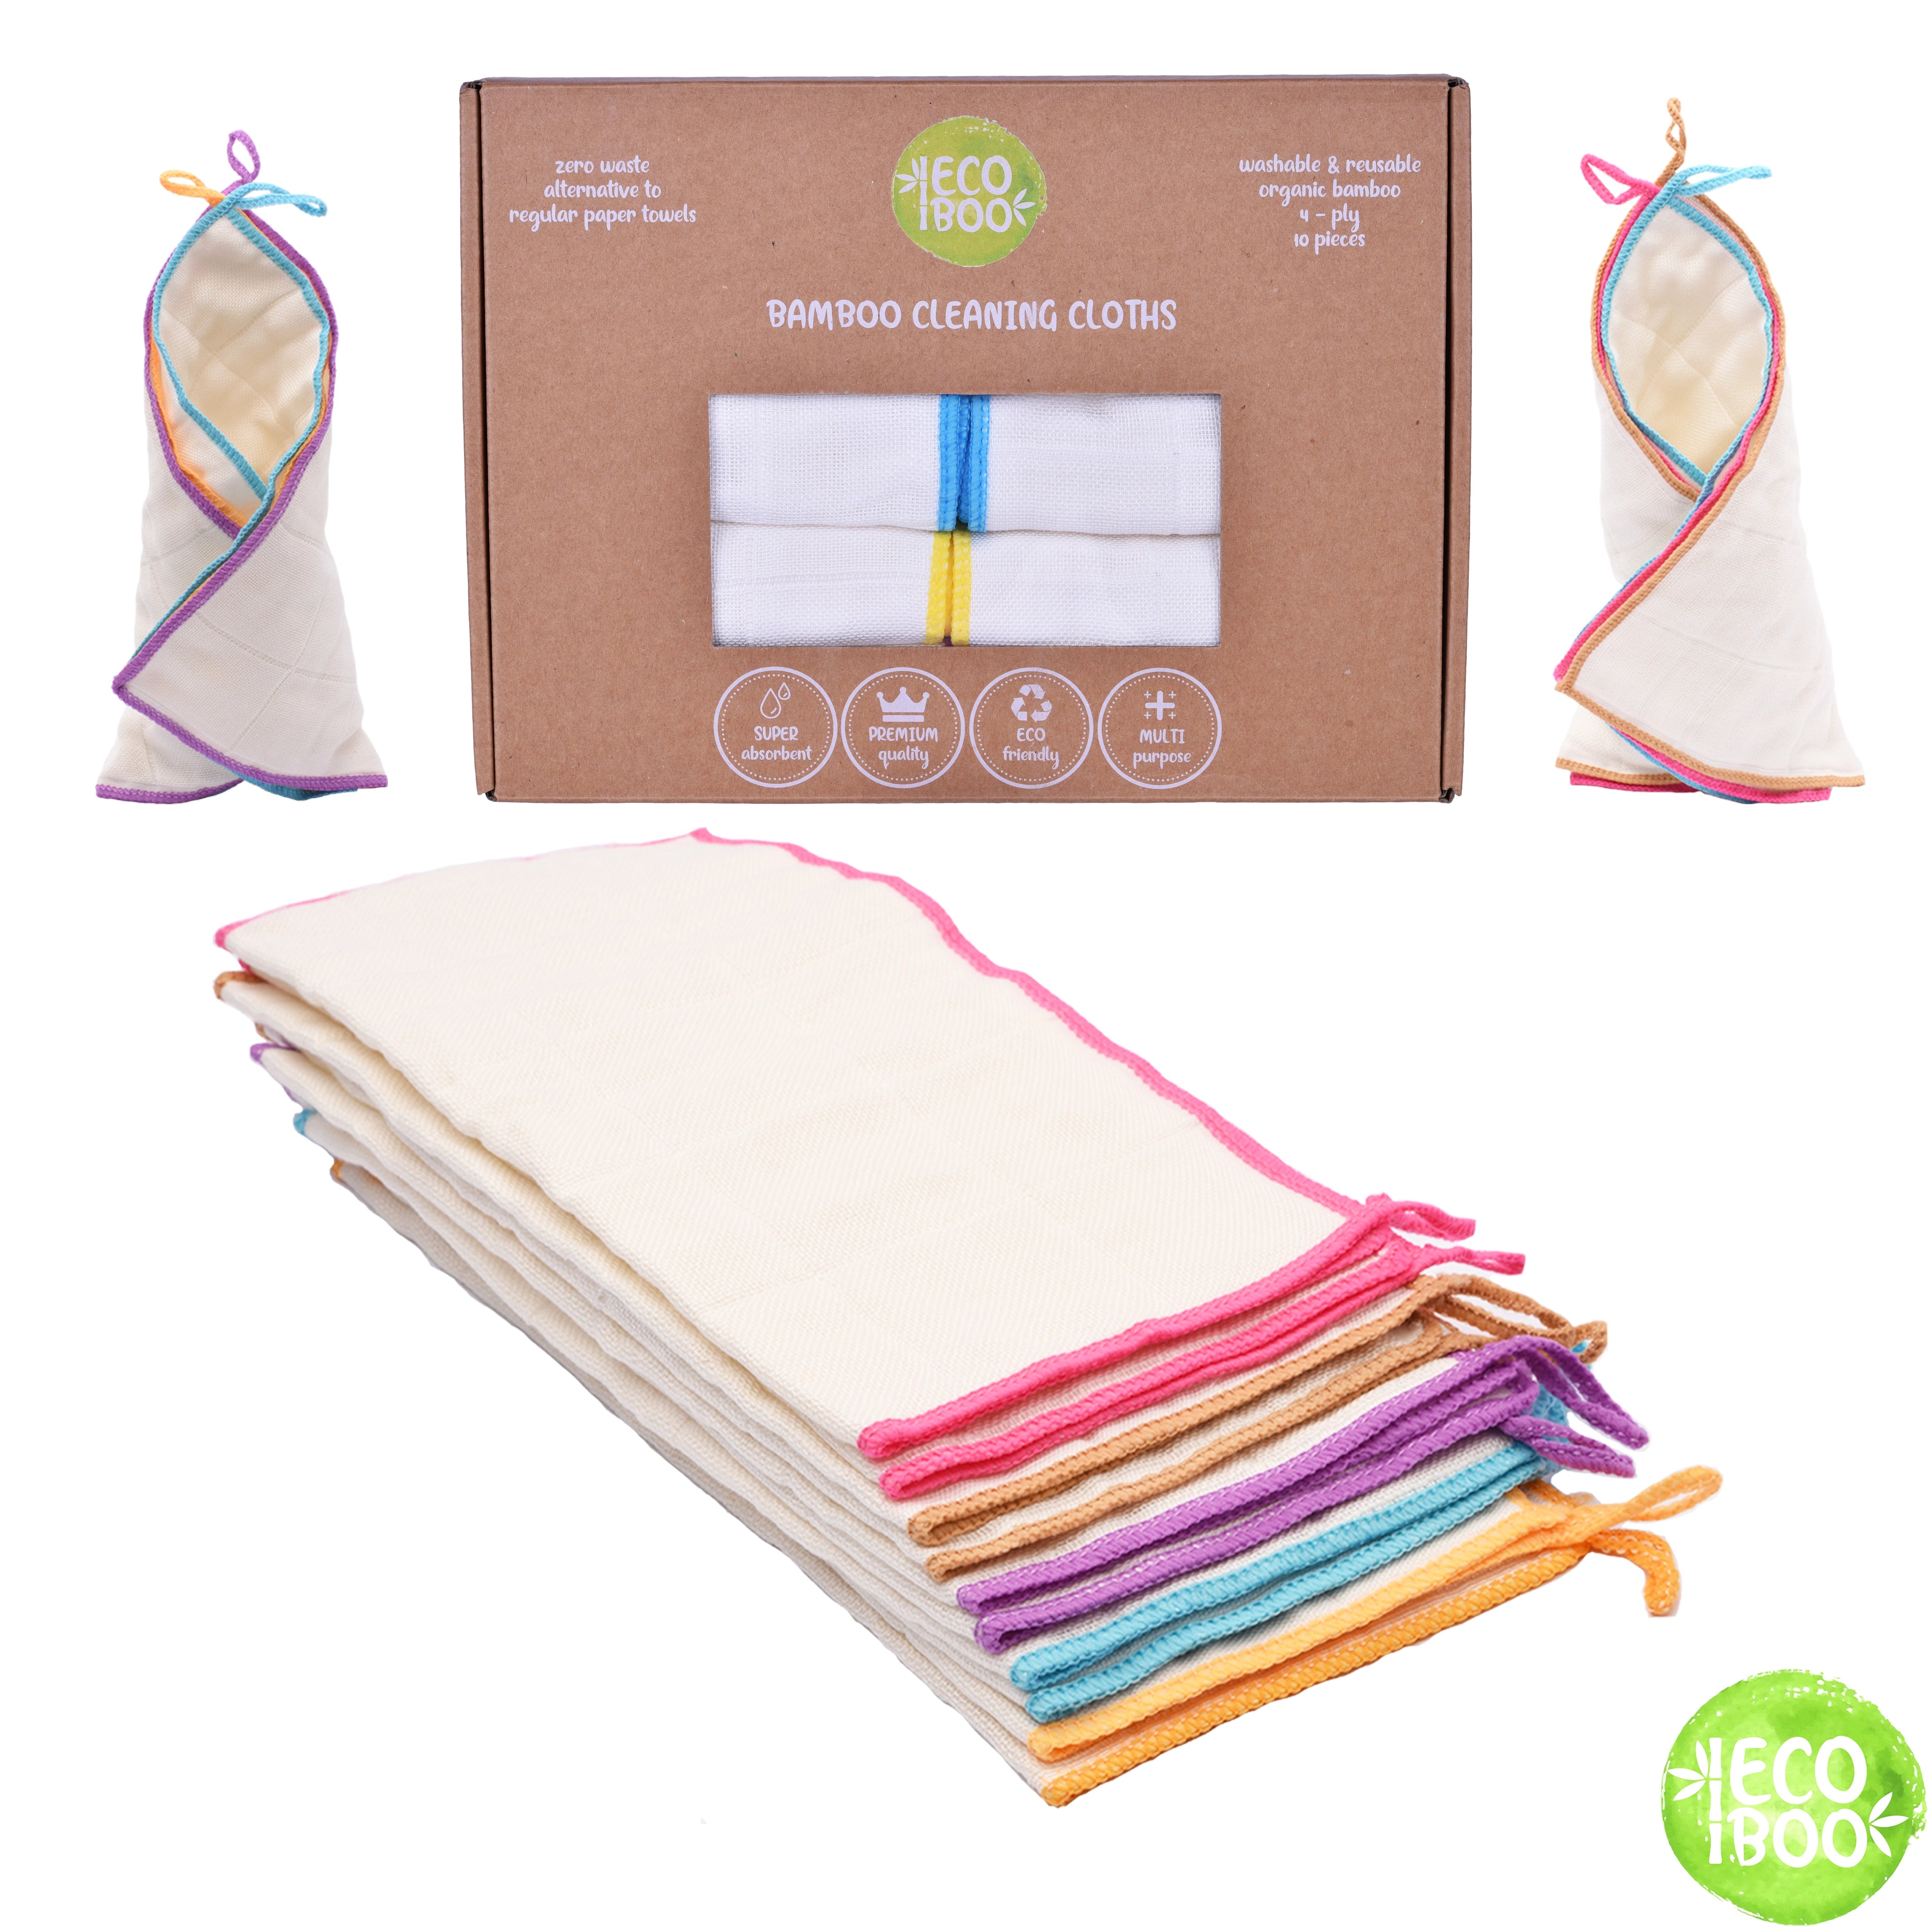 Ultimate Reusable Bamboo Paper Towels & Natural Cleaning Tools Set